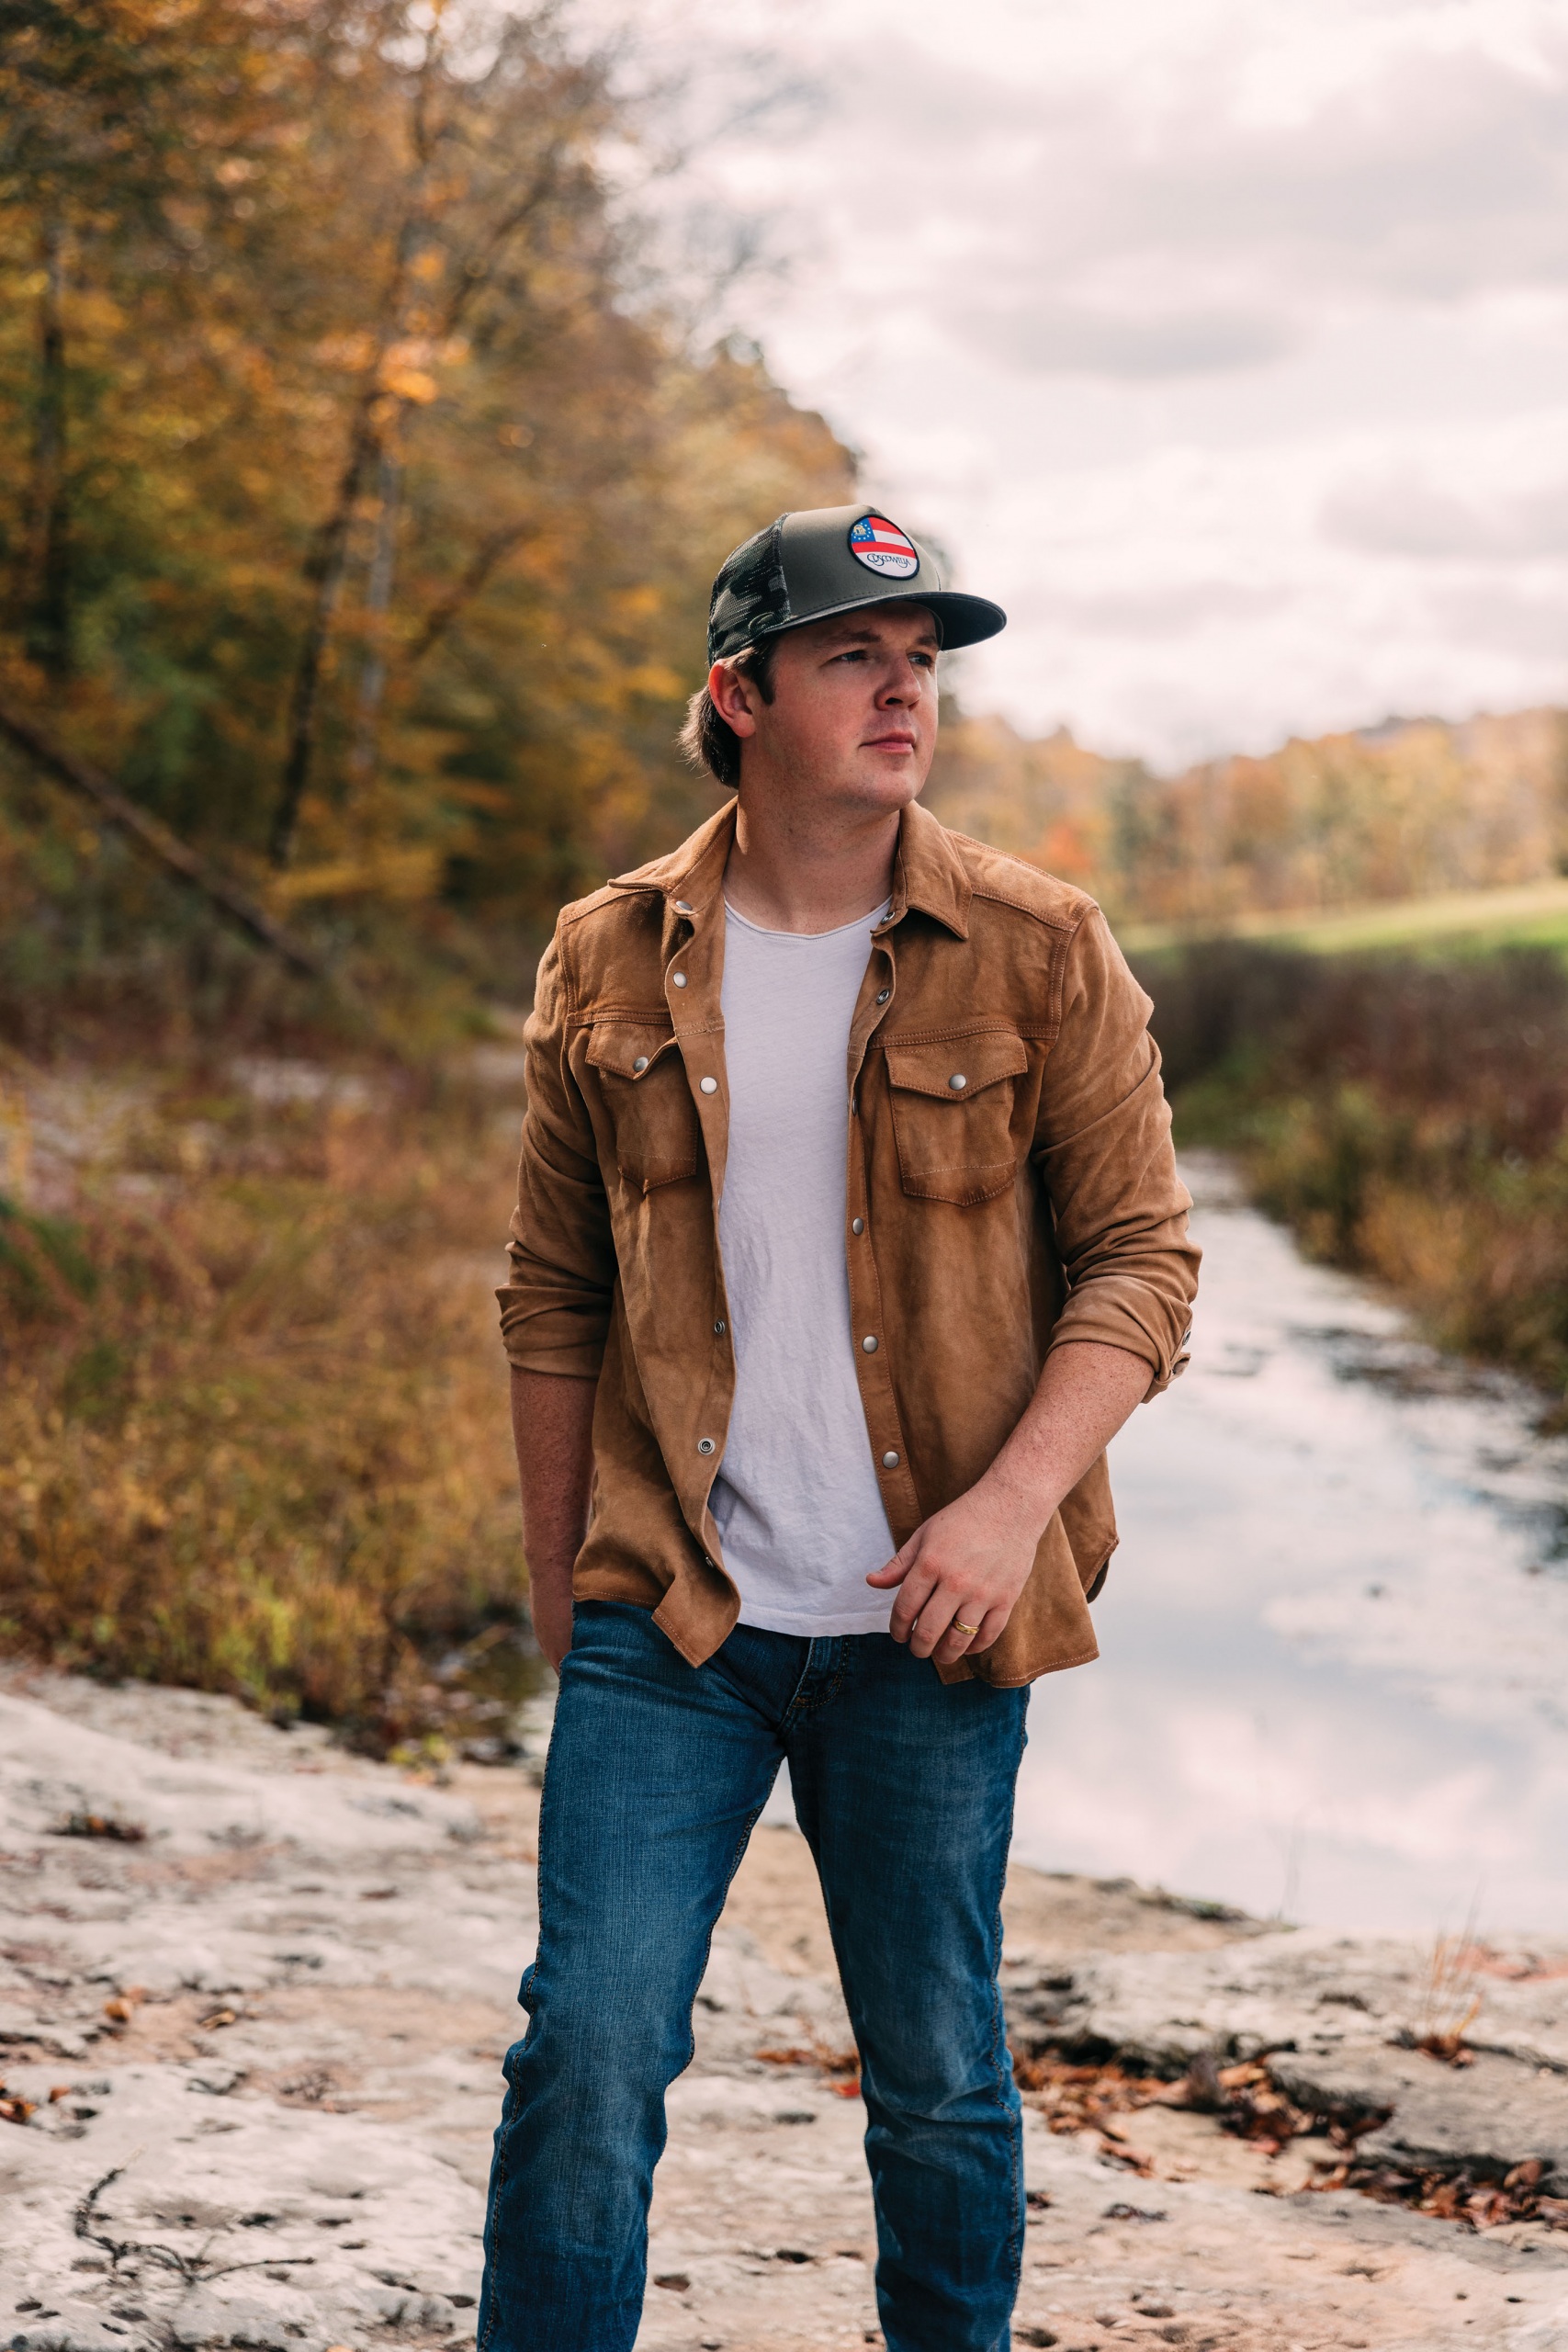 TRAVIS DENNING RELEASES NEW TRACK “ADD HER TO THE LIST”  OFF HIS UPCOMING DEBUT ALBUM  ROADS THAT GO NOWHERE COMING MAY 24th.